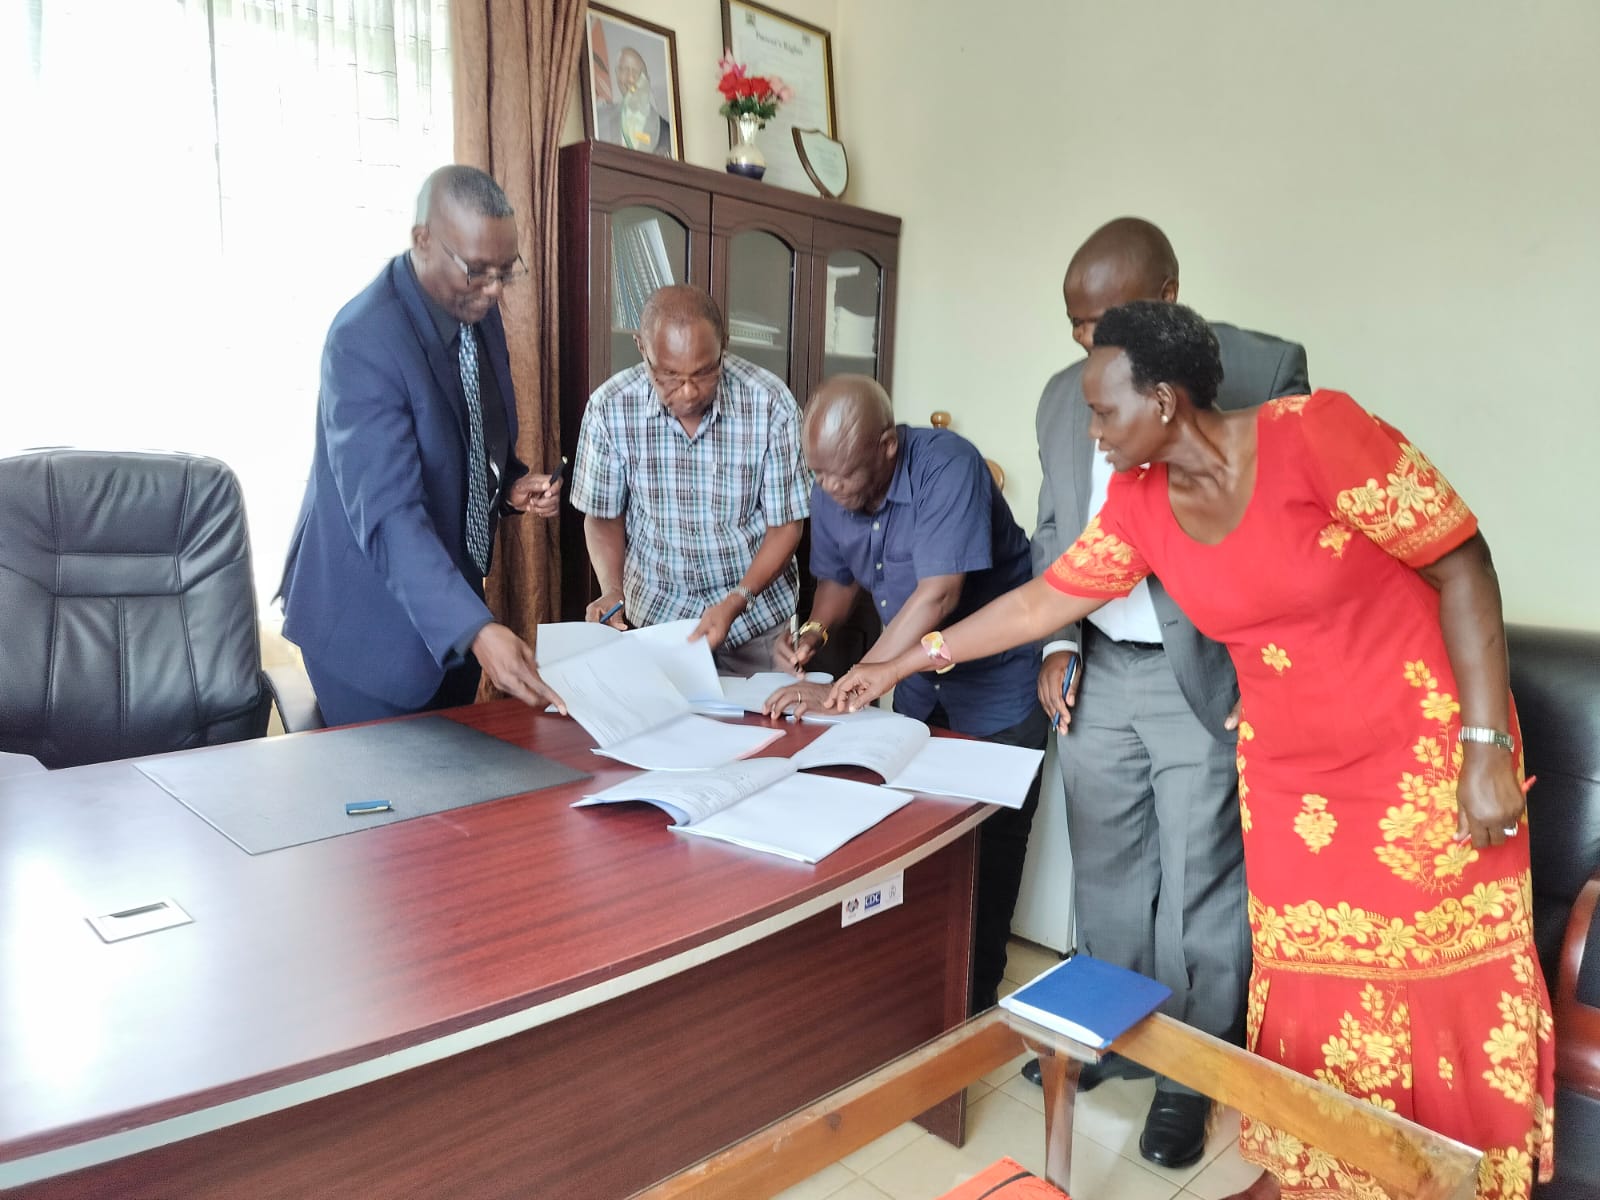 MOU signing with Siaya County Teaching and Referral Hospital lead by Prof.Chris Oyoo from Uzima and Dr.Ogoti Evans Medical Superintendent SCTRH